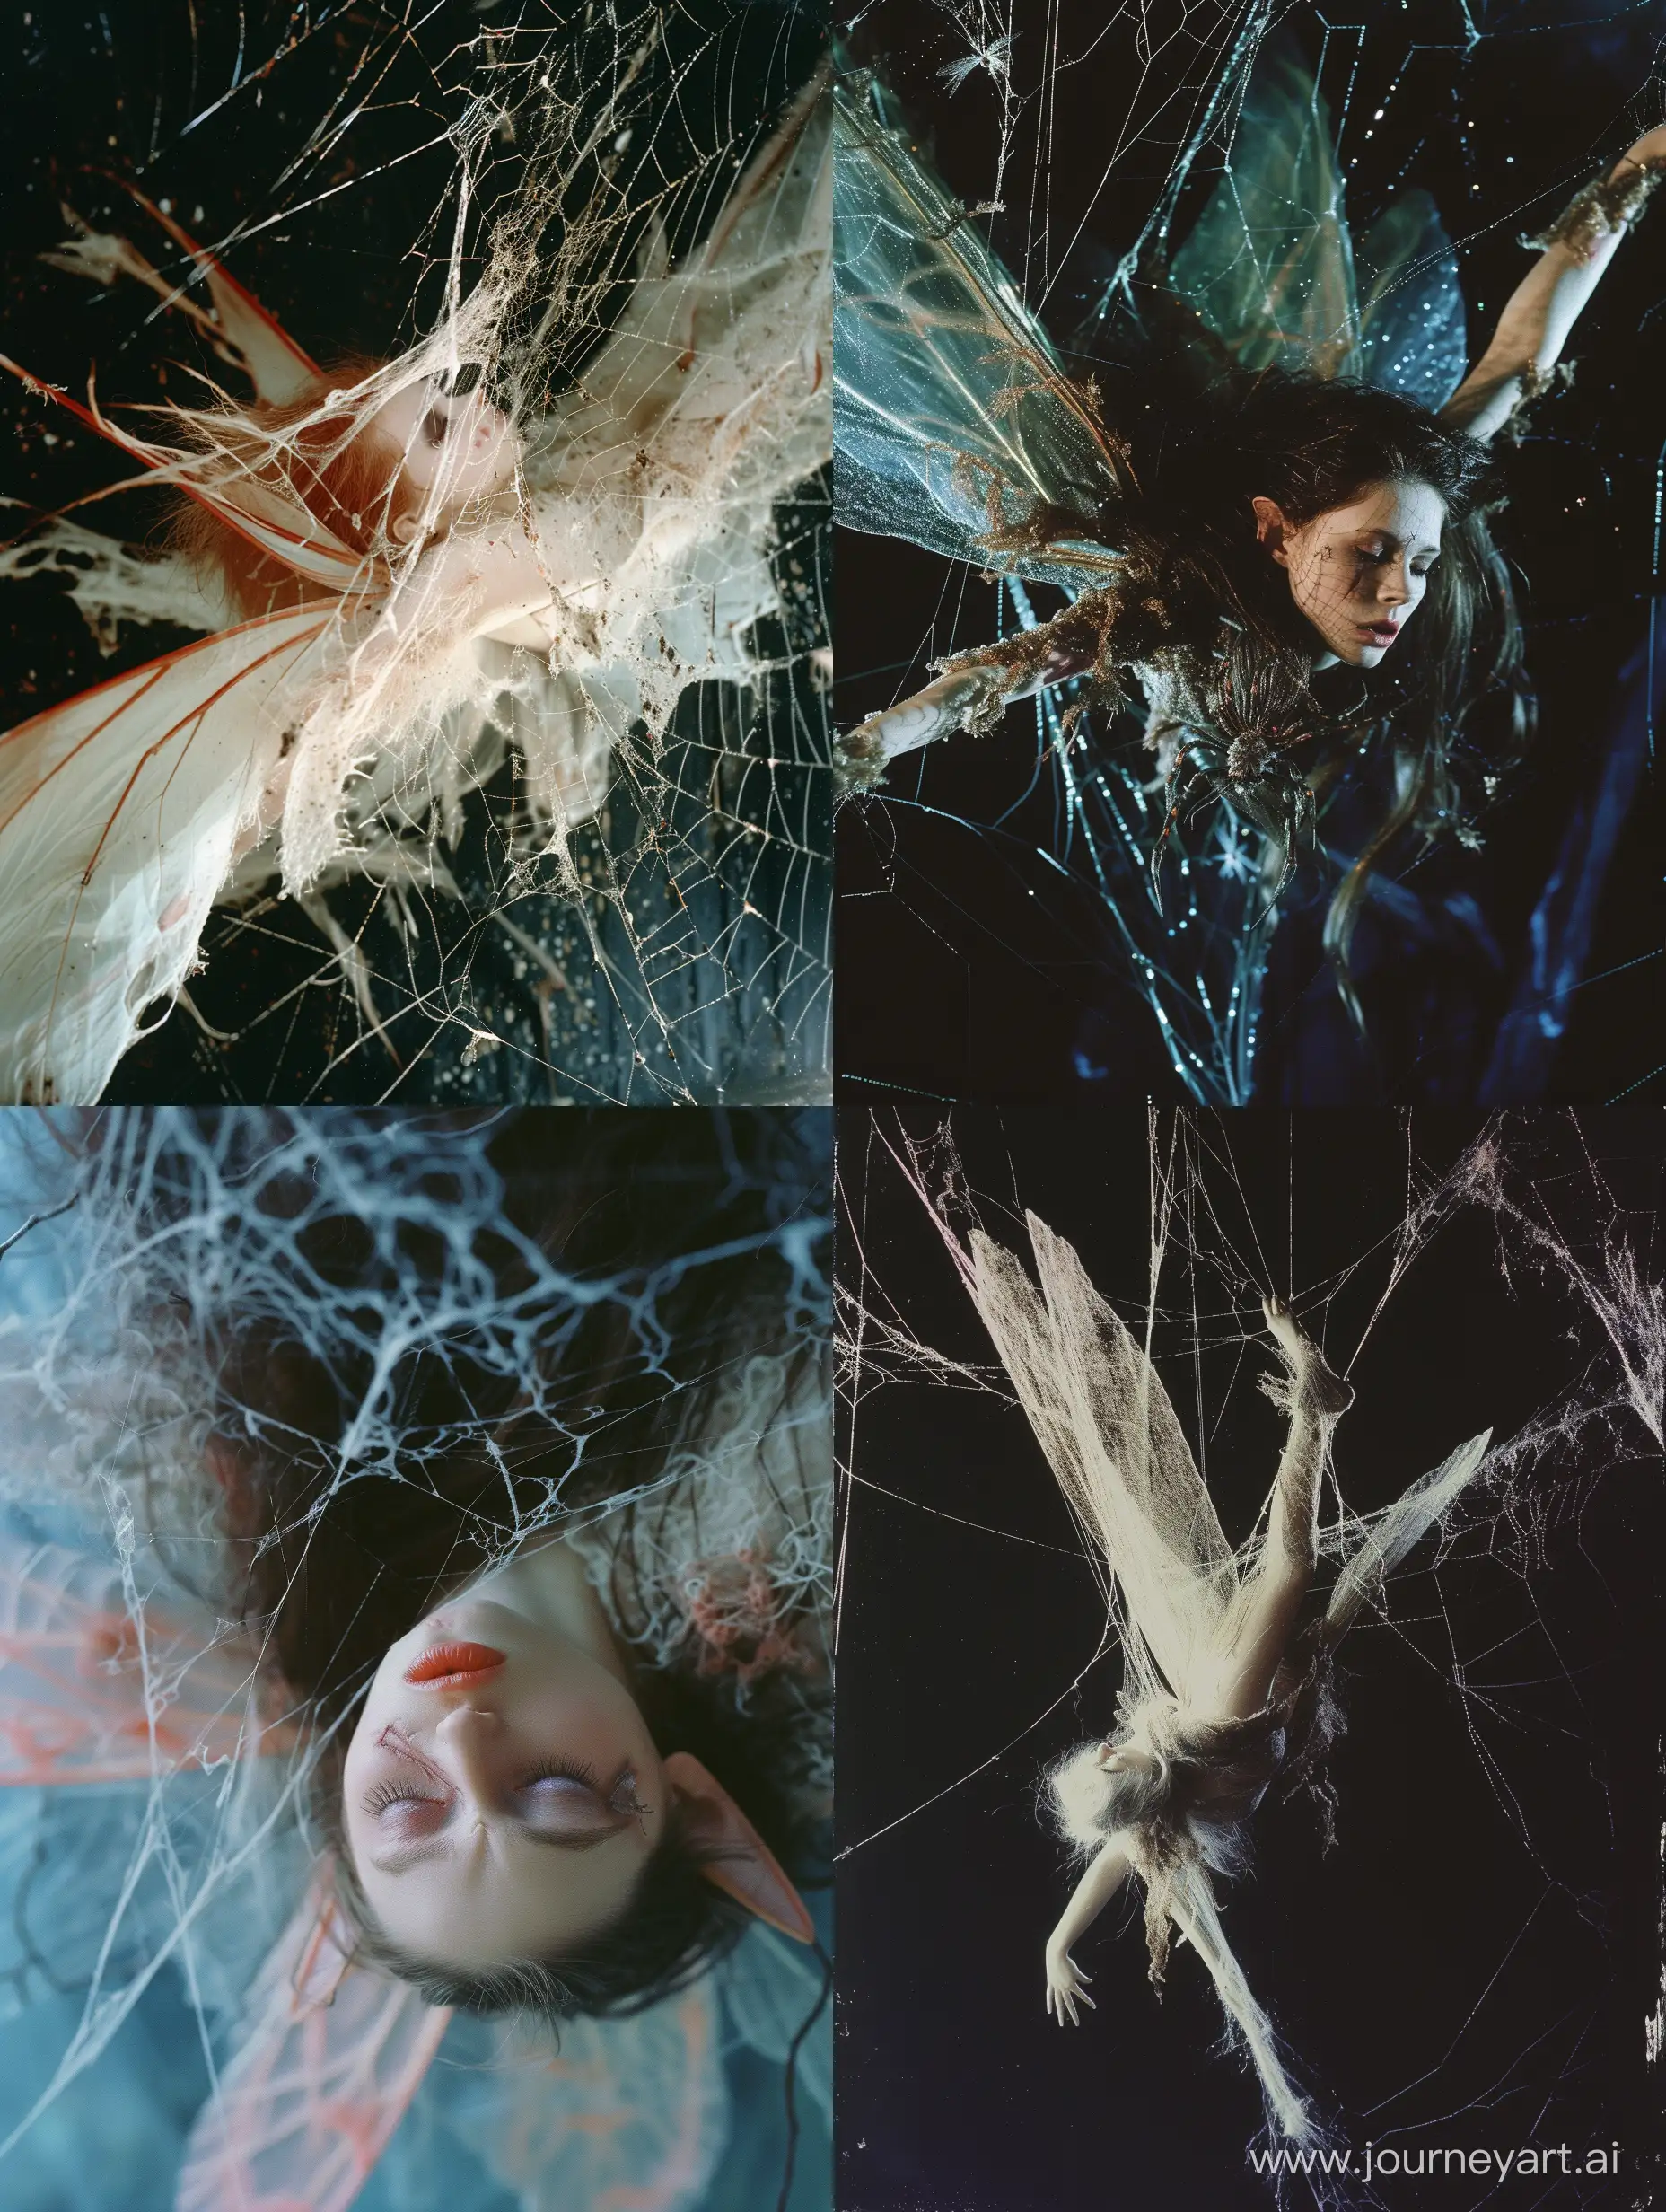 Wide angle Saturated image of a beautiful fairy woman tangled up in a spider web, suspended upside down tangled in web, tattered delicate wings, attention to detail, horror core, dark aesthetic, taken on provia